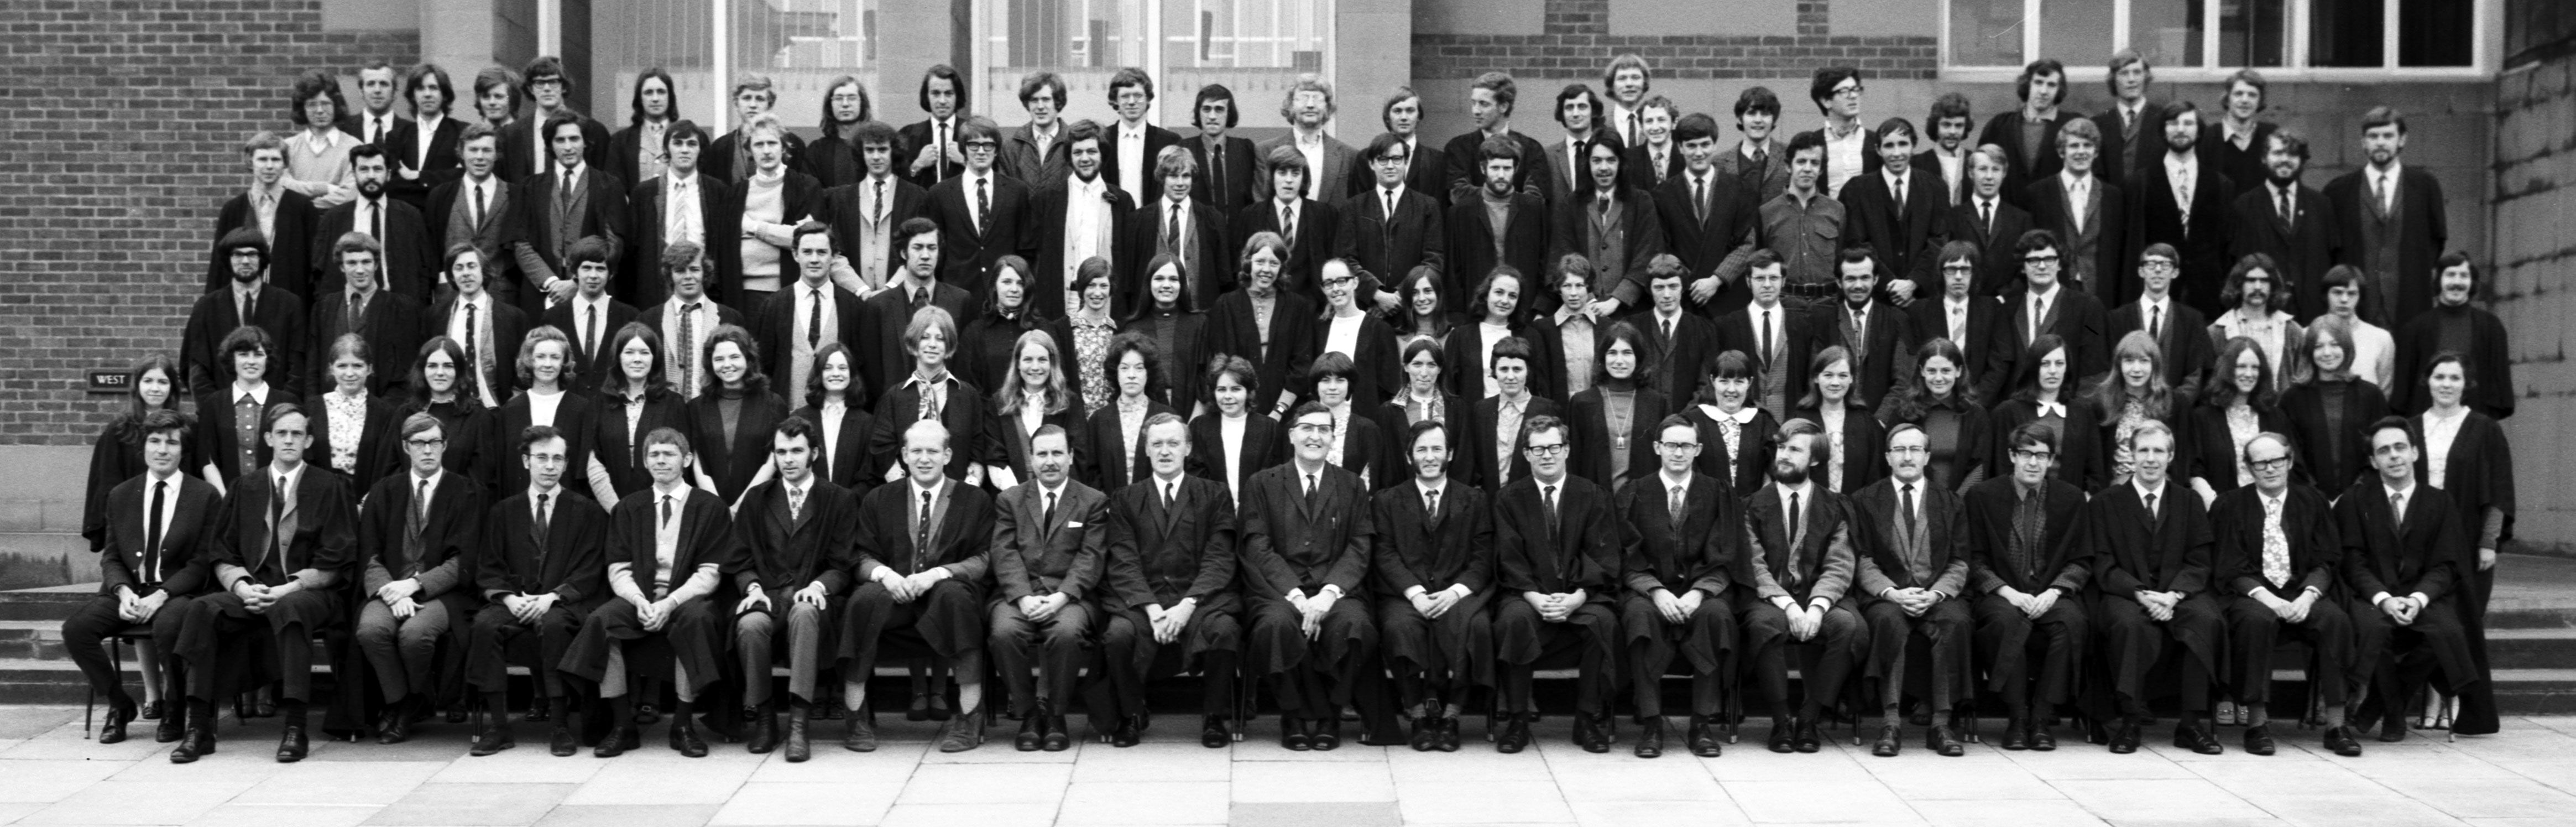 Geography Department Undergraduate Group photo from 1971